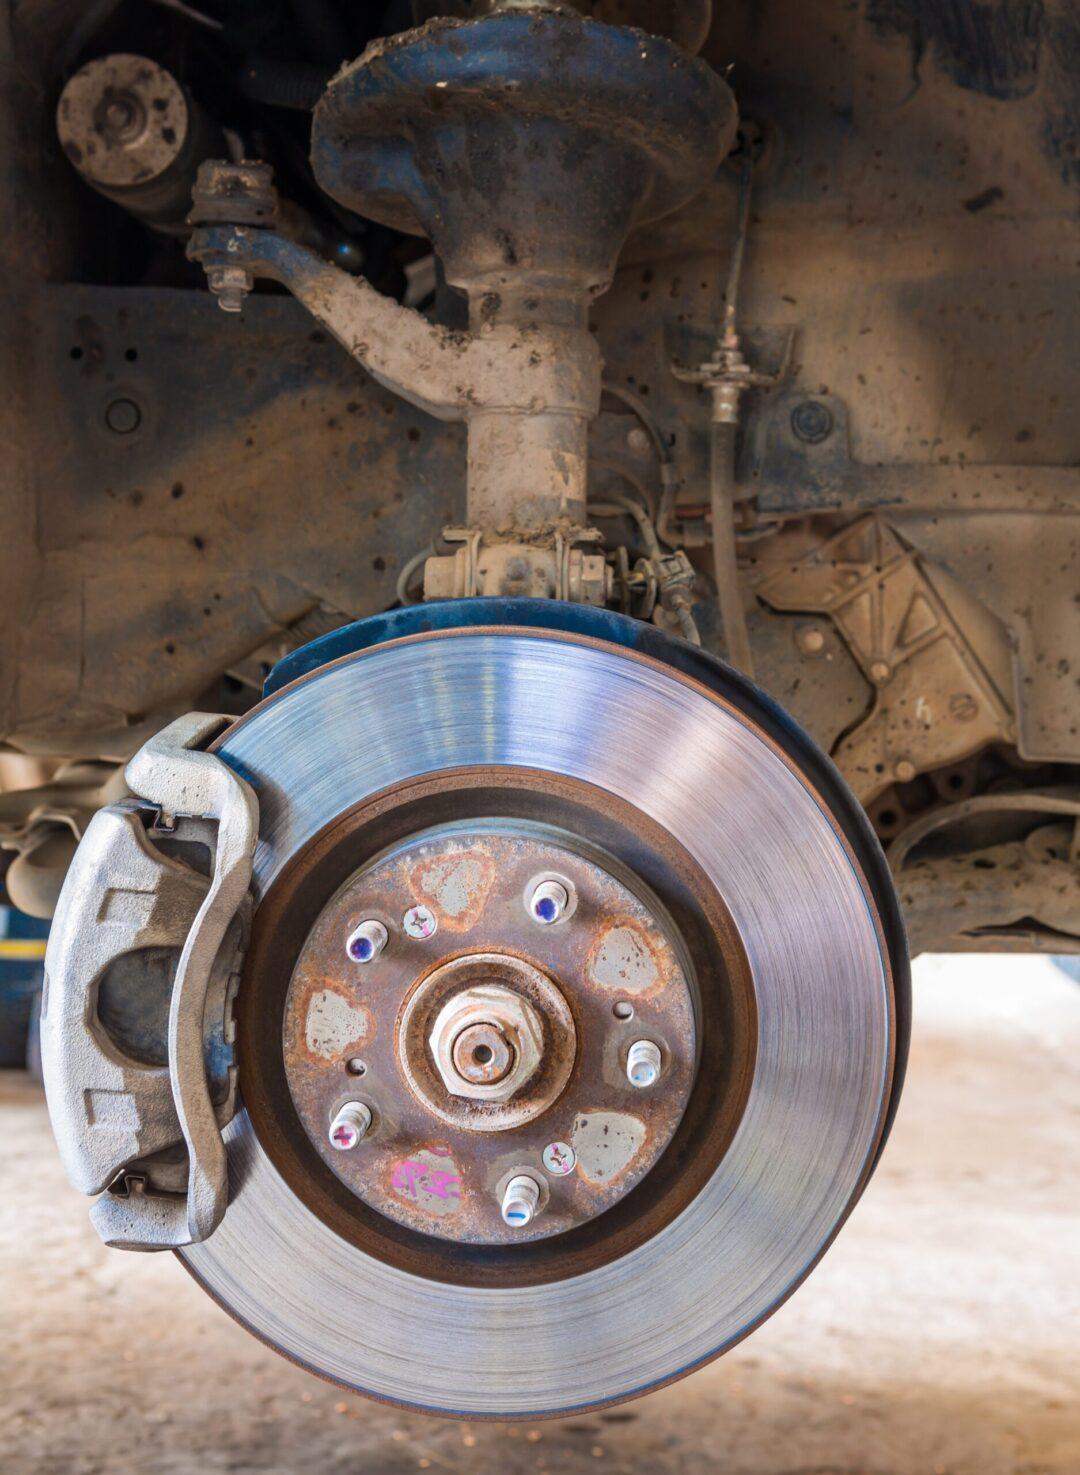 Know When To Replace Your Used Car Brake Pads